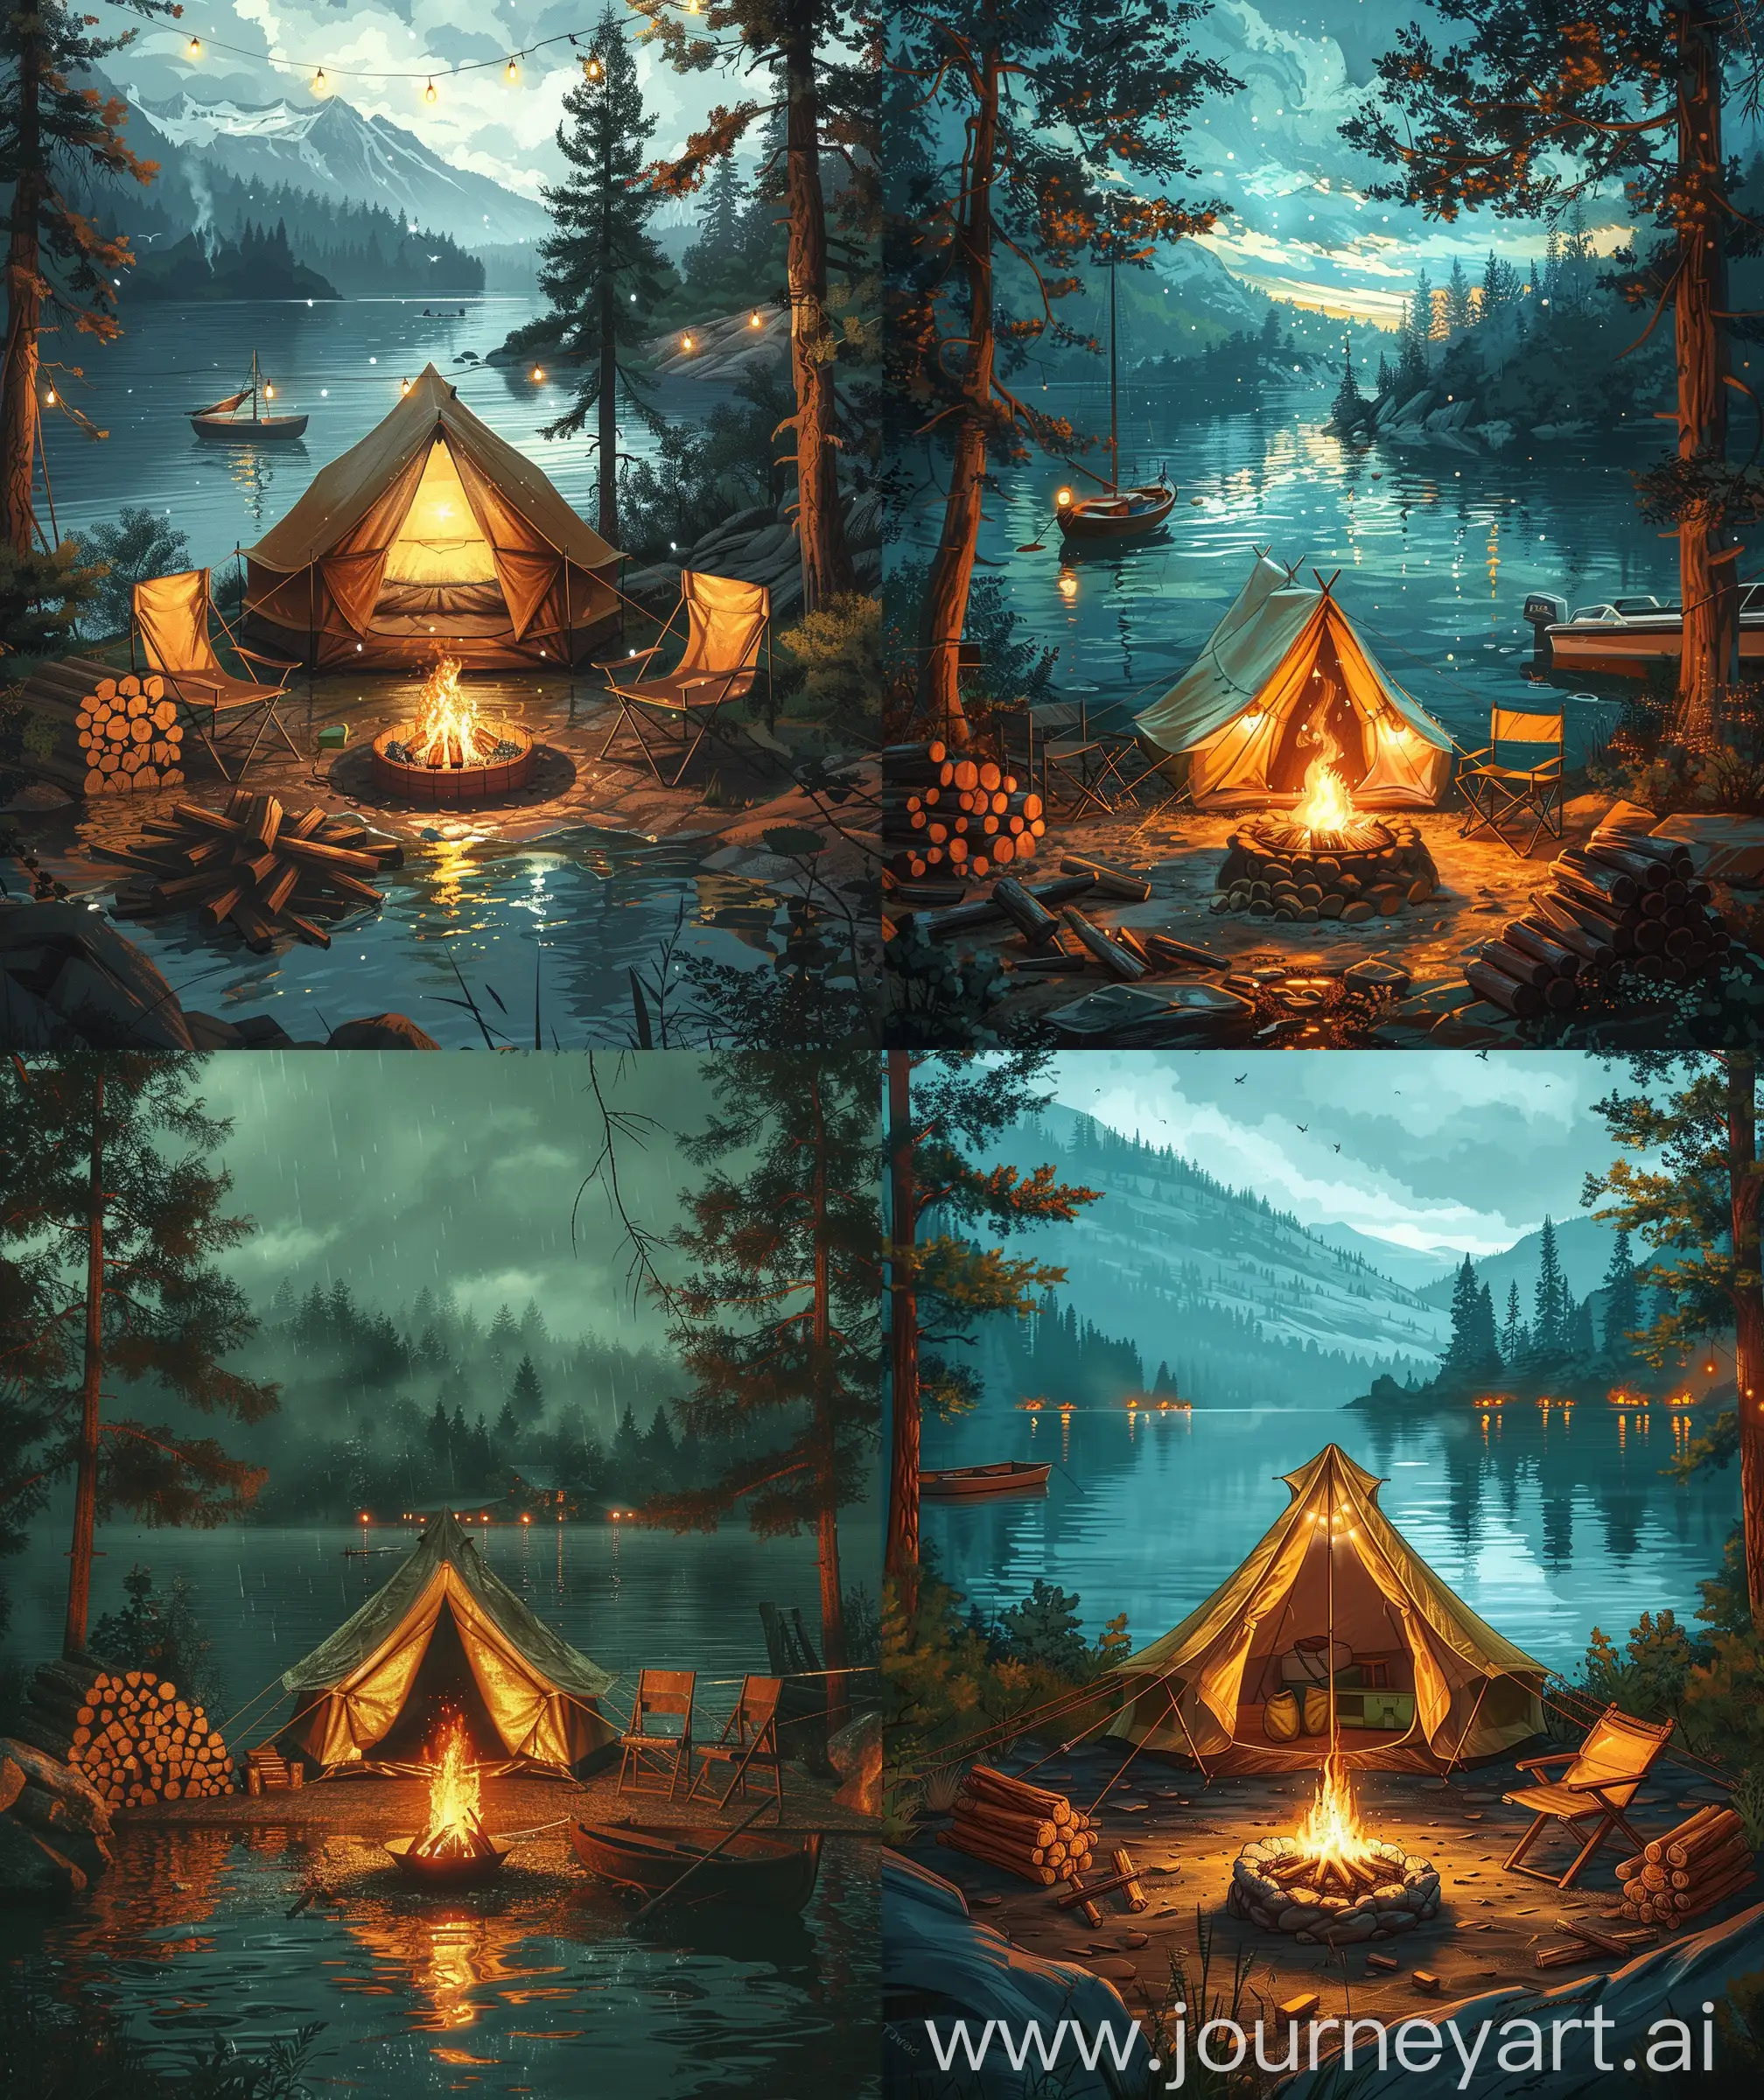 Vintage-Anime-Lakeside-Camping-Illustration-with-Tent-Fire-Pit-and-Nature-Ambiance